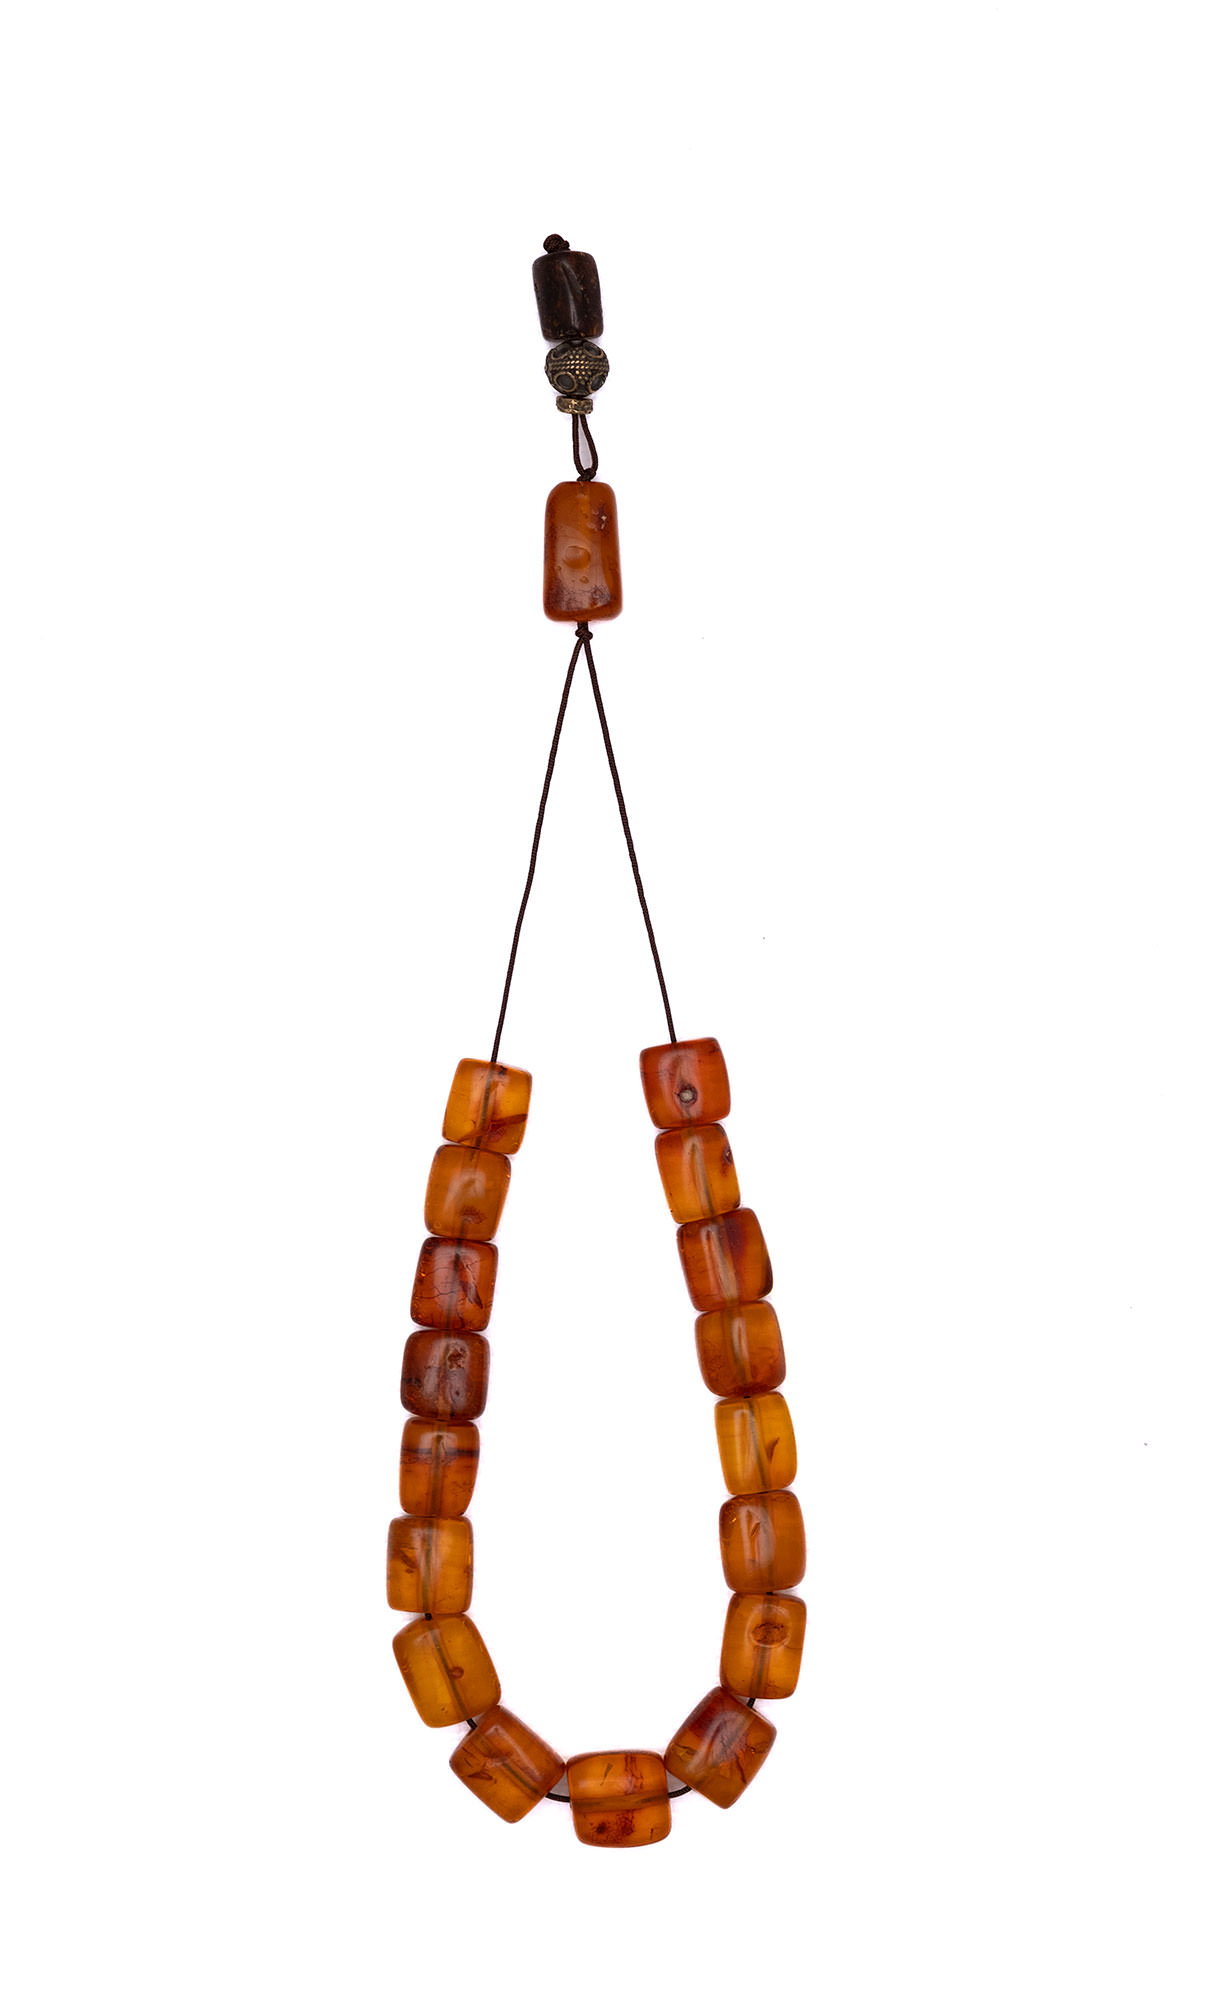 Komboloi made of genuine amber from Baltic sea- cut by hand - Golden brown.